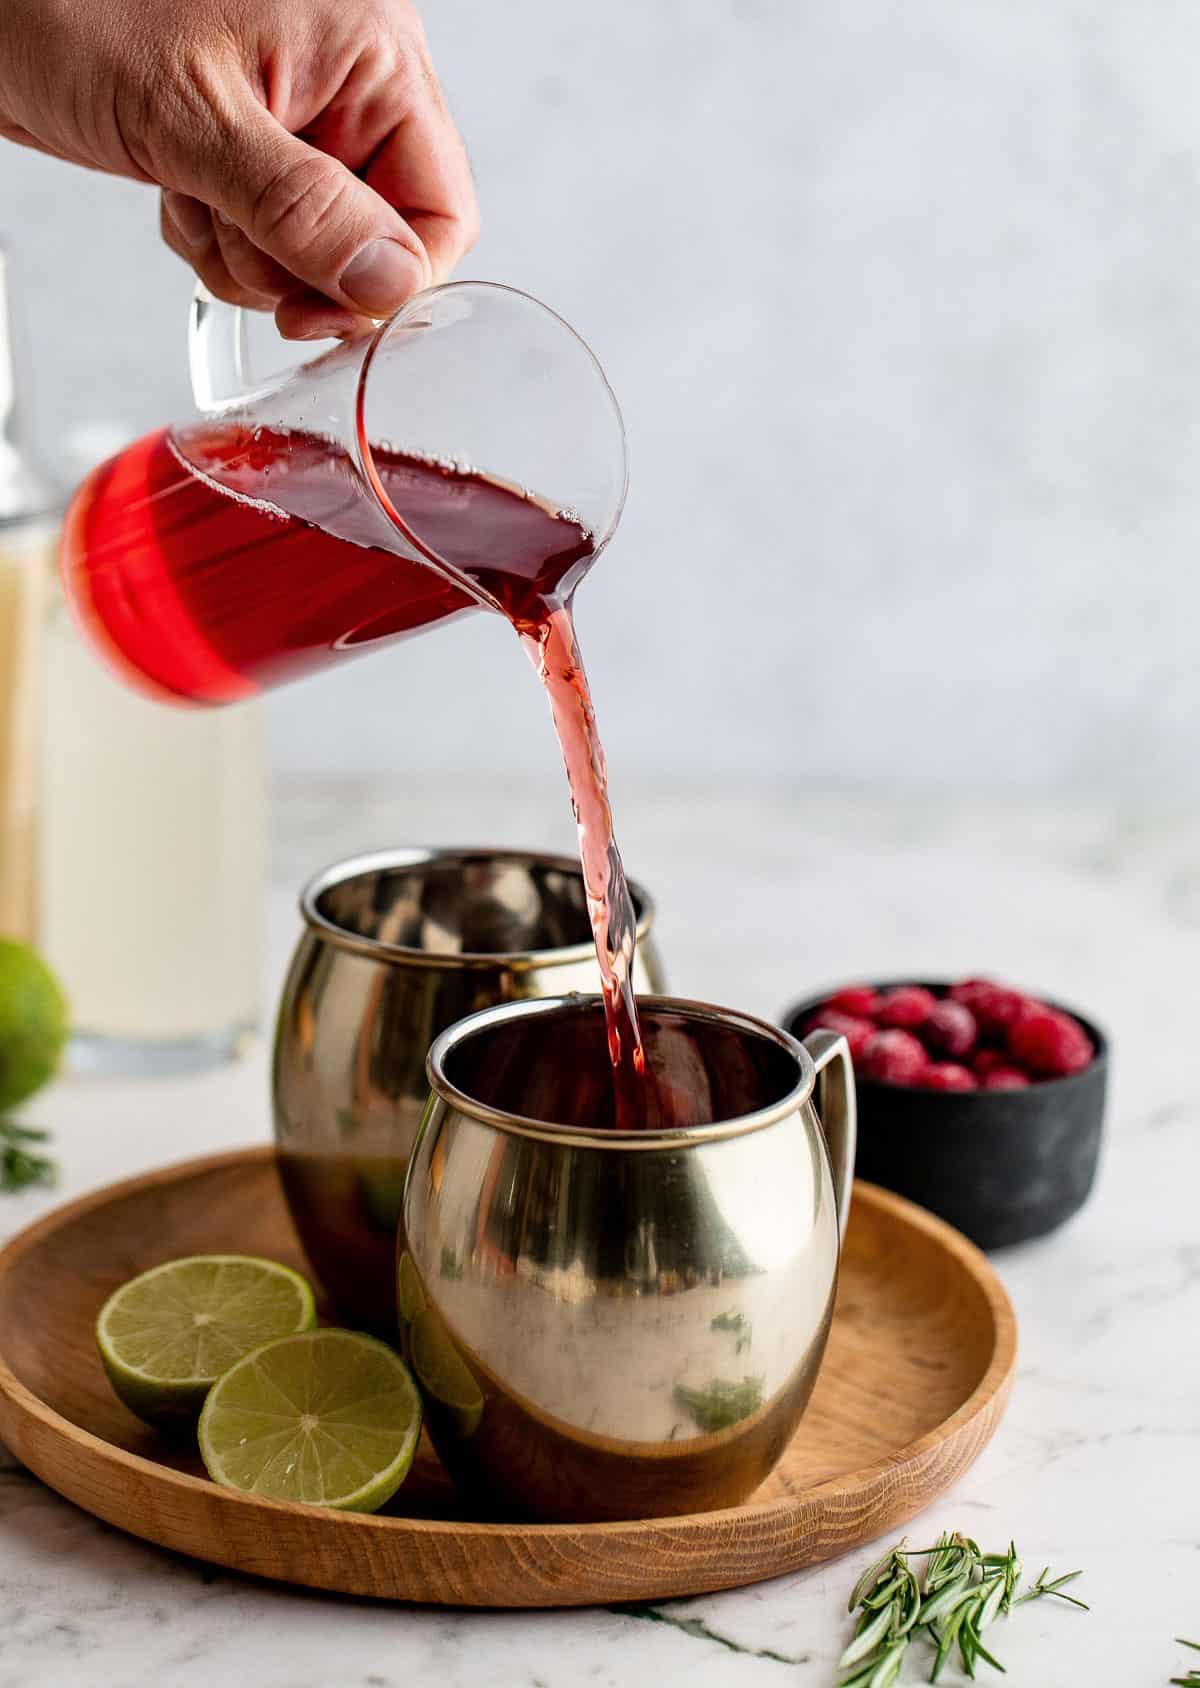 Cranberry juice being poured into a copper mug with a second mug and other ingredients around it.